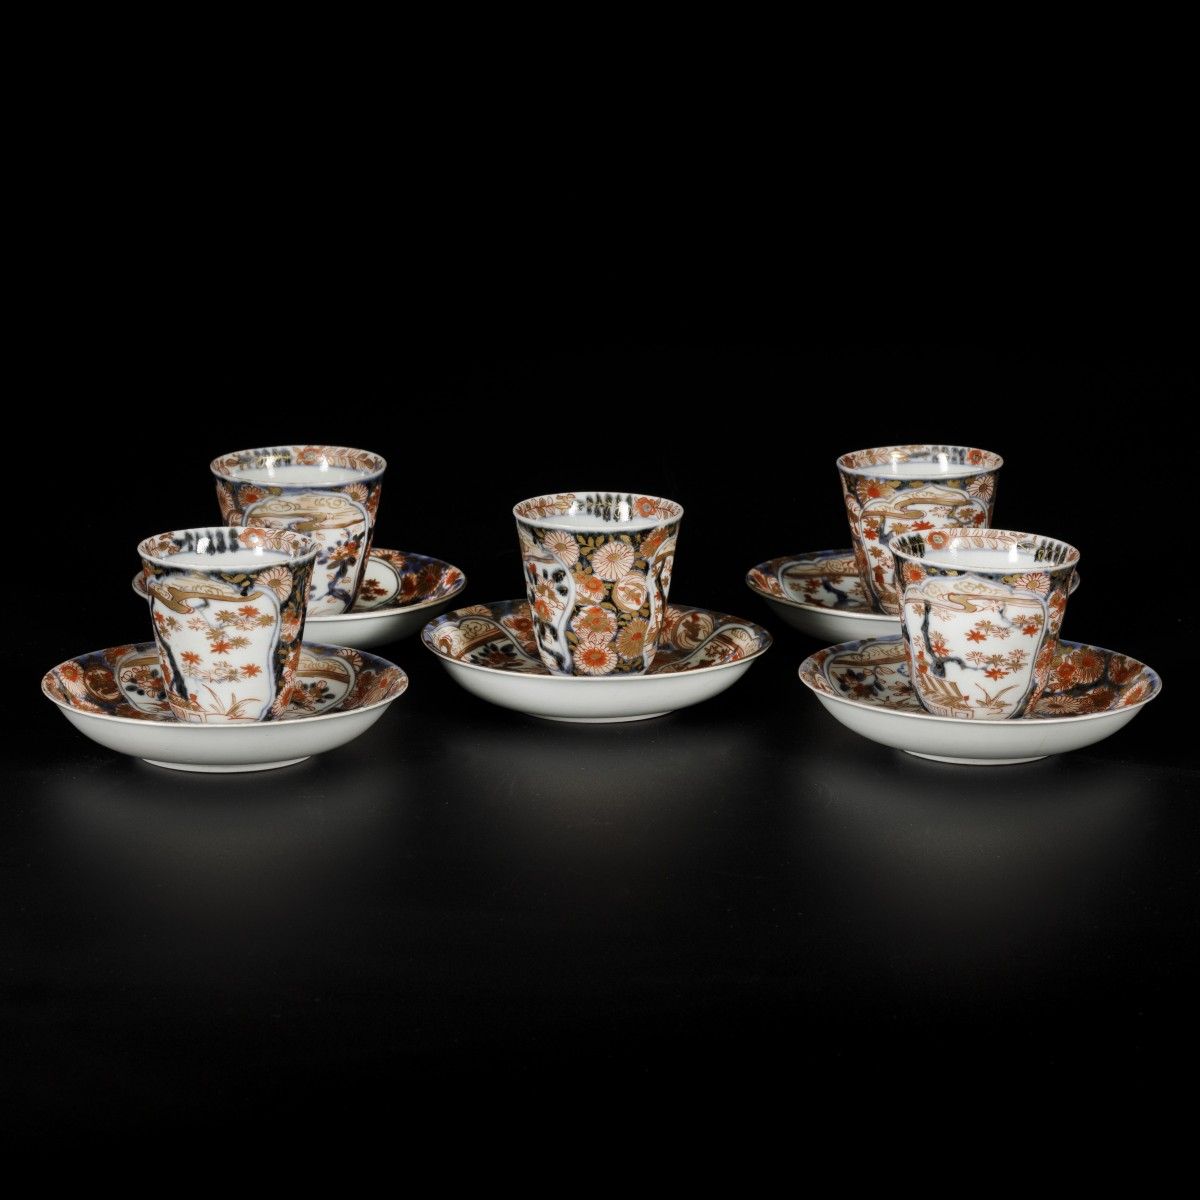 A set of (5) porcelain cups and saucers with Imari decor, Japan, 18th century. D&hellip;